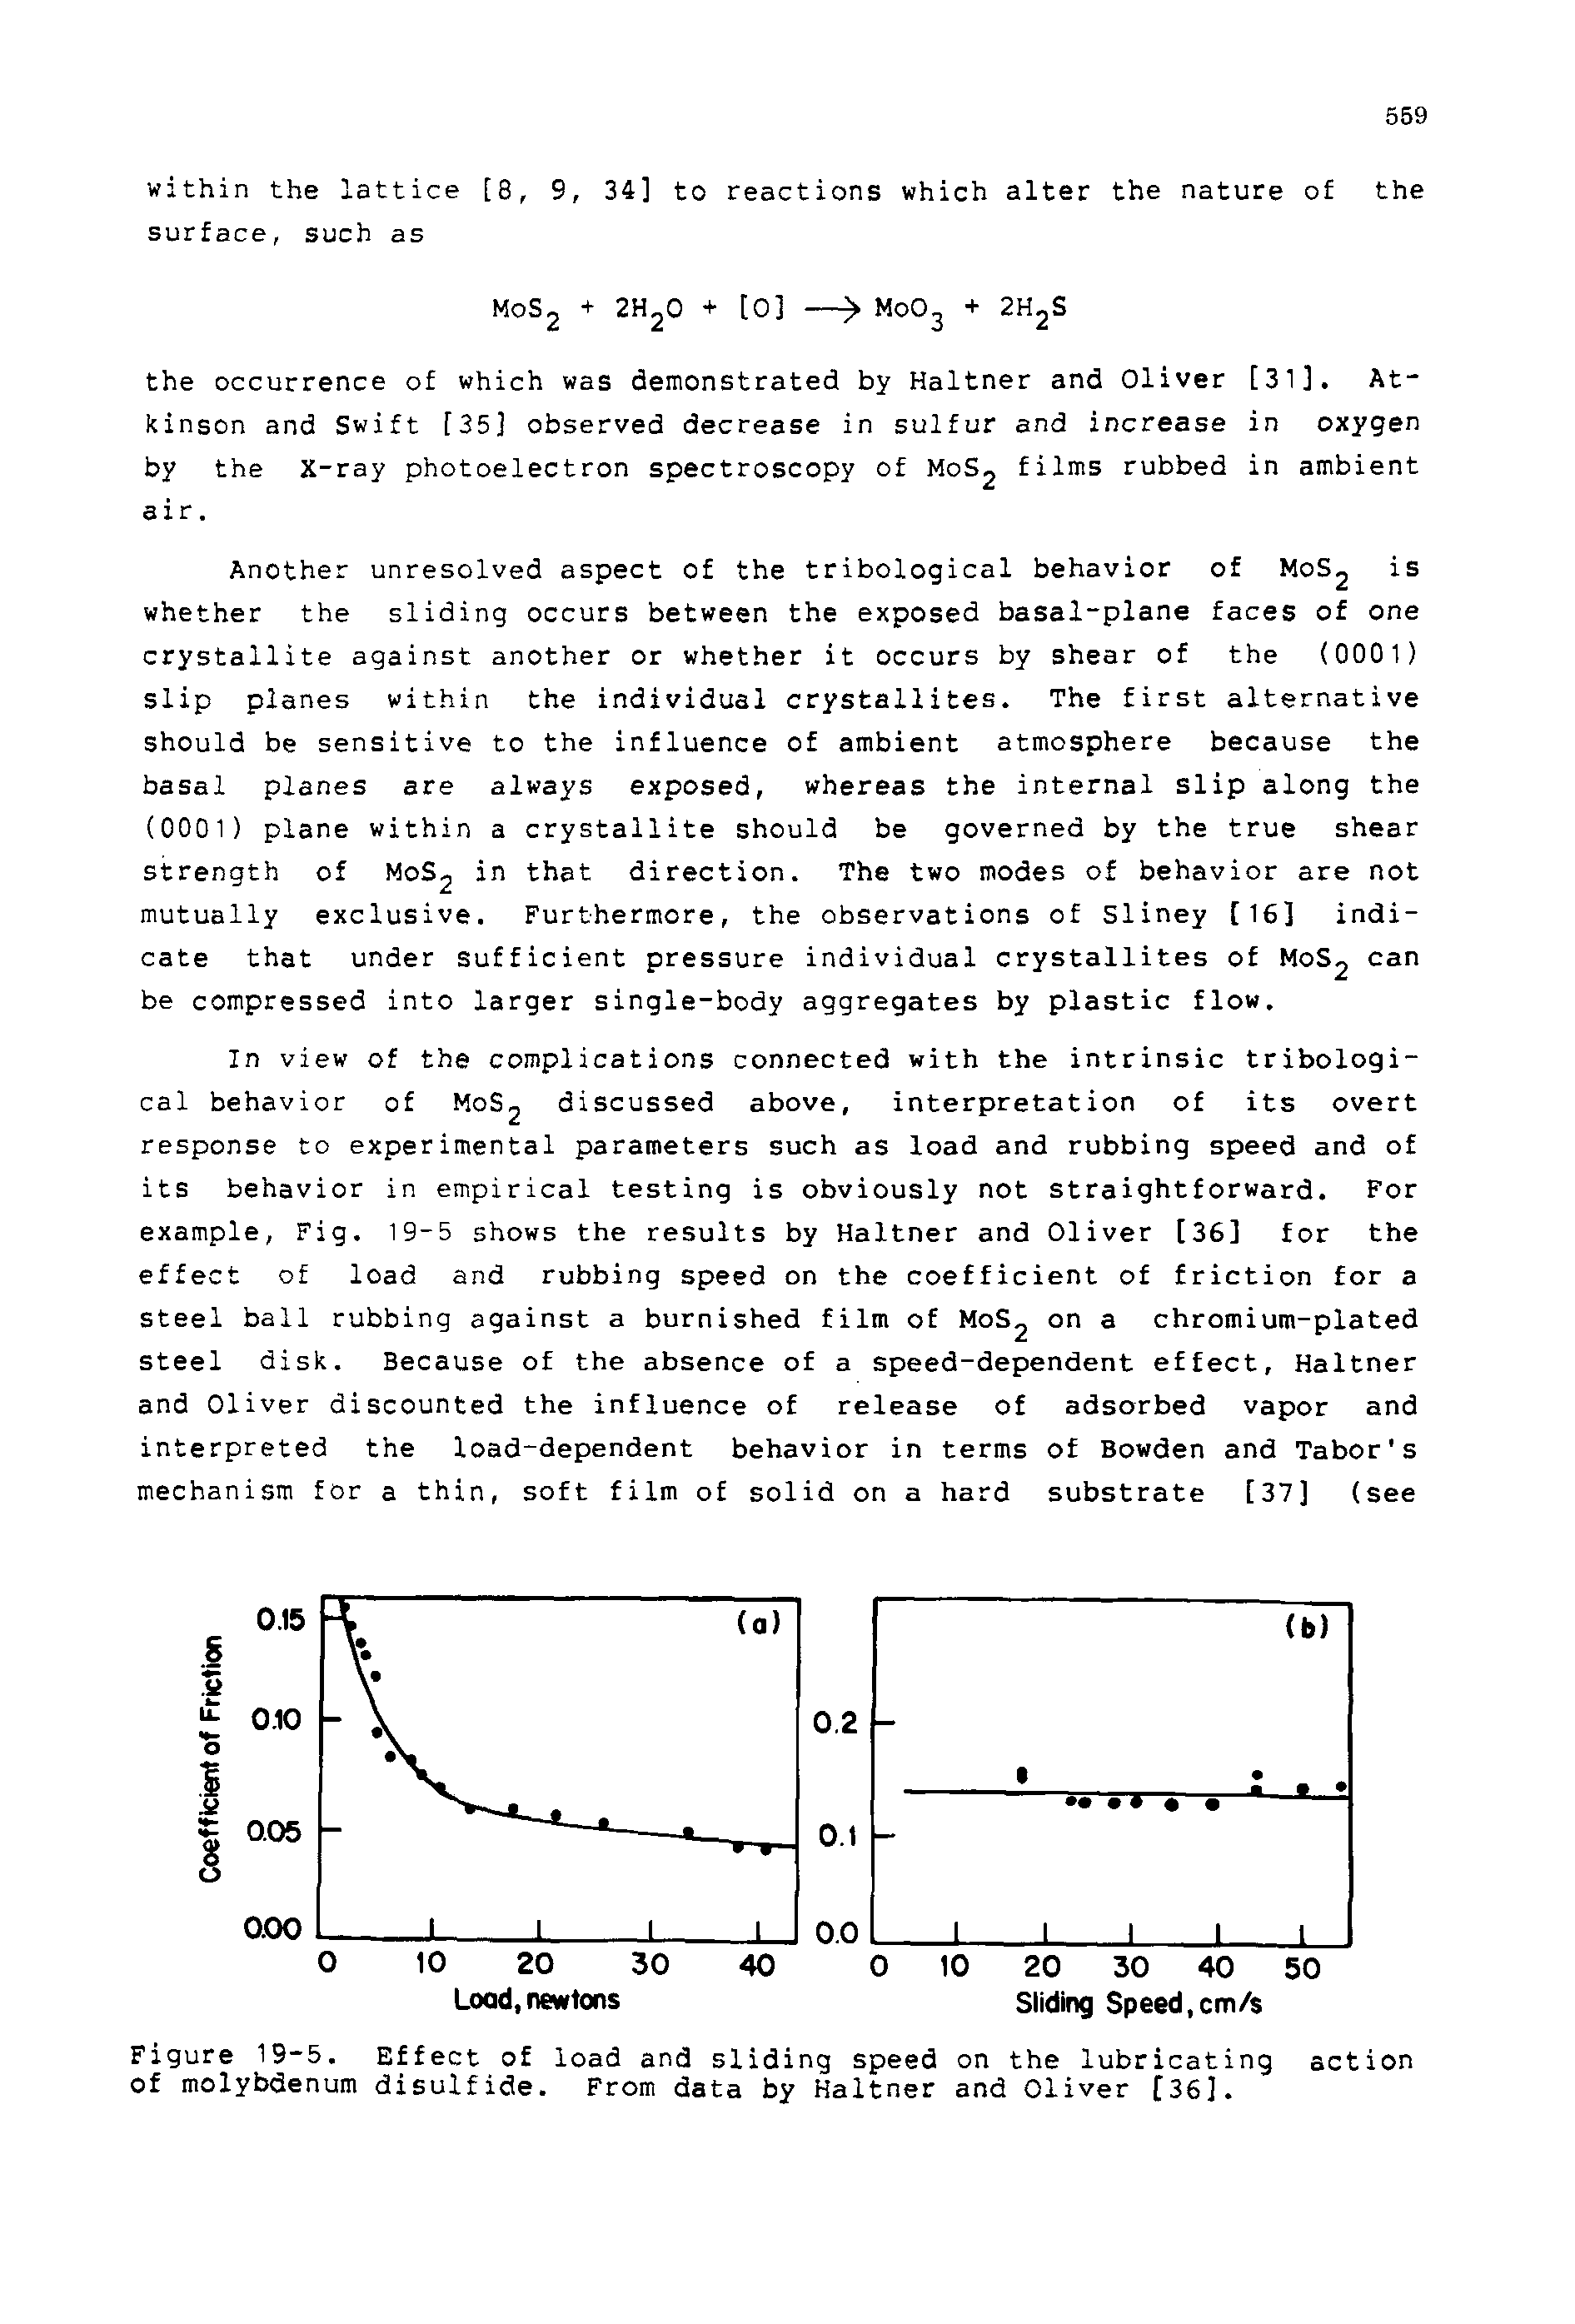 Figure 19-5. Effect of load and sliding speed on the lubricating action of molybdenum disulfide. From data by Haltner and Oliver [36].